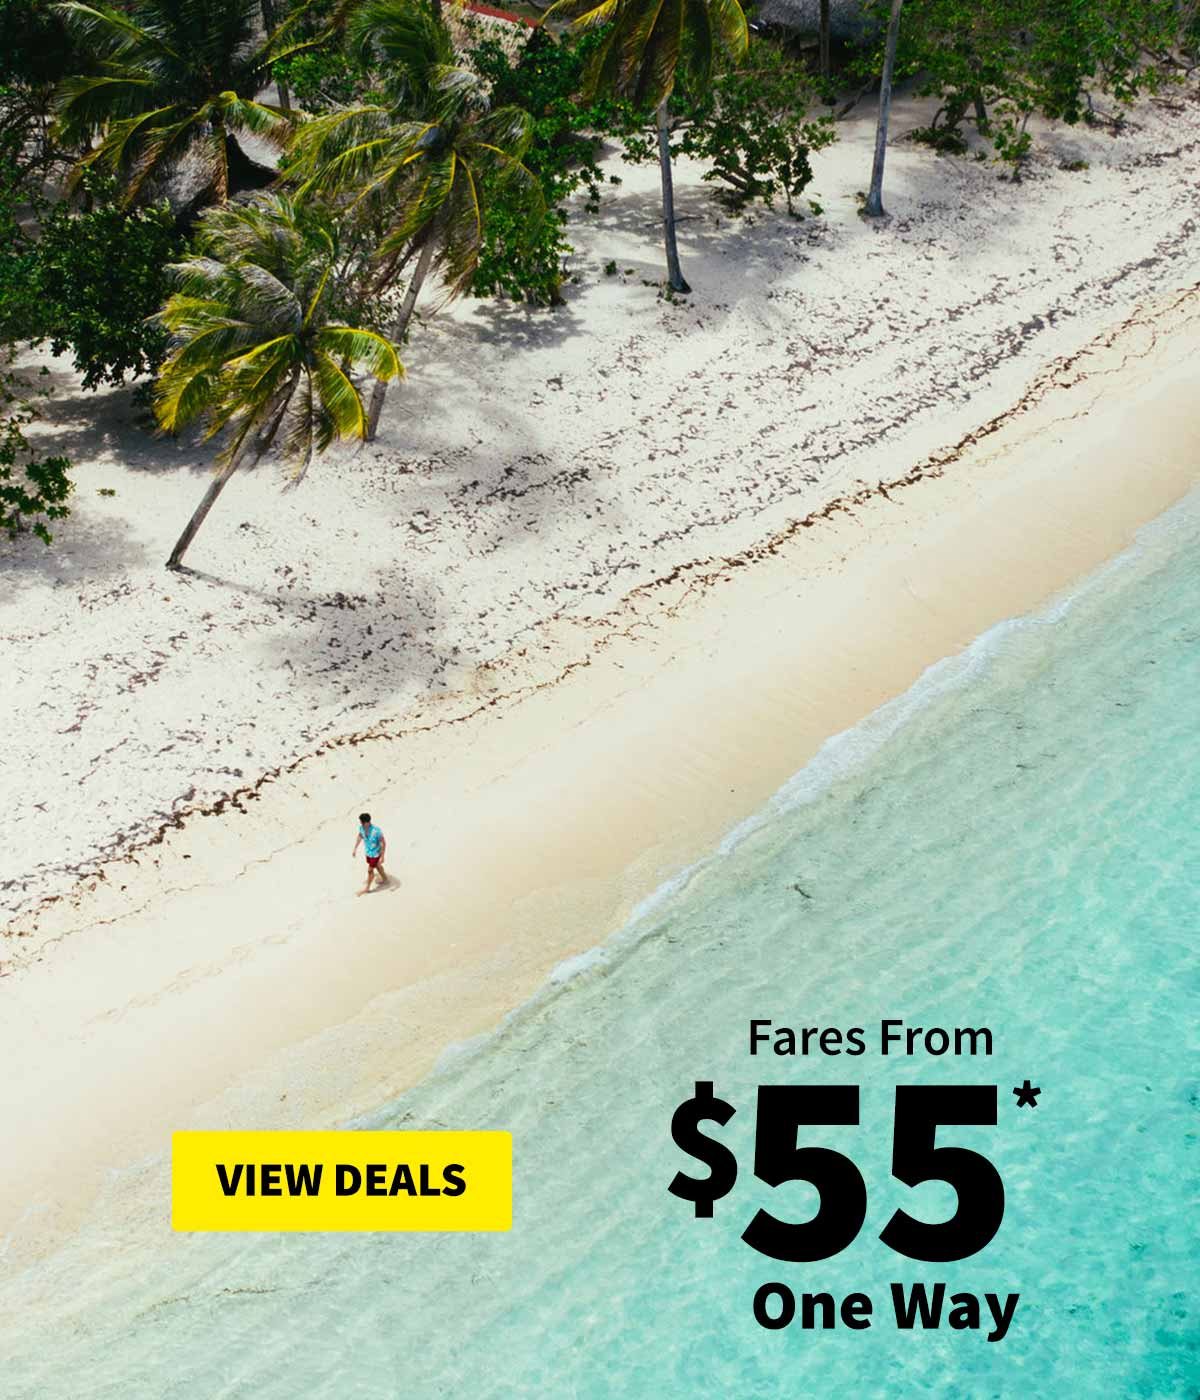 Fares From $55* One Way